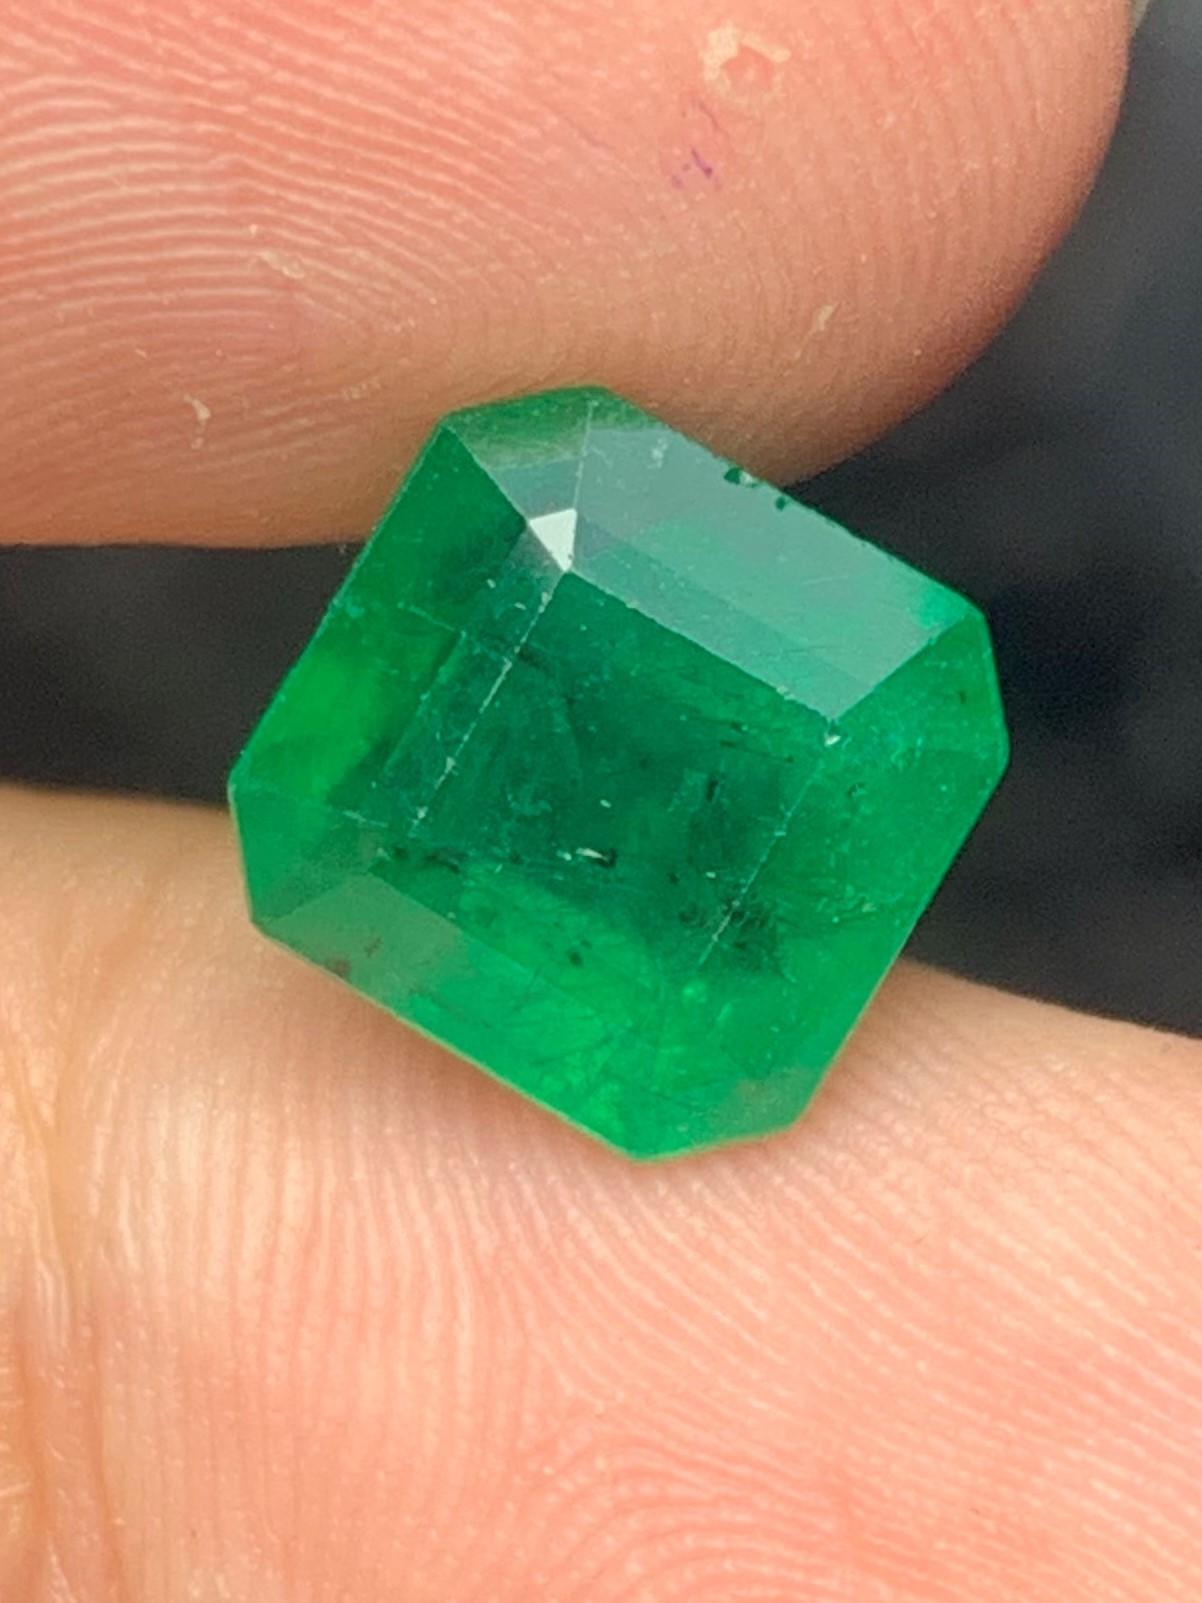 Loose Emerald
Weight: 4.65 Carats
Dimension: 9.7x9.5x6.8 Mm
Origin: Zambia Mine
Shape: Emerald
Treatment: Non
Certificate: On Demand
.
Wearing an emerald gives strength to the planet Mercury located in the person's horoscope. It enhances the